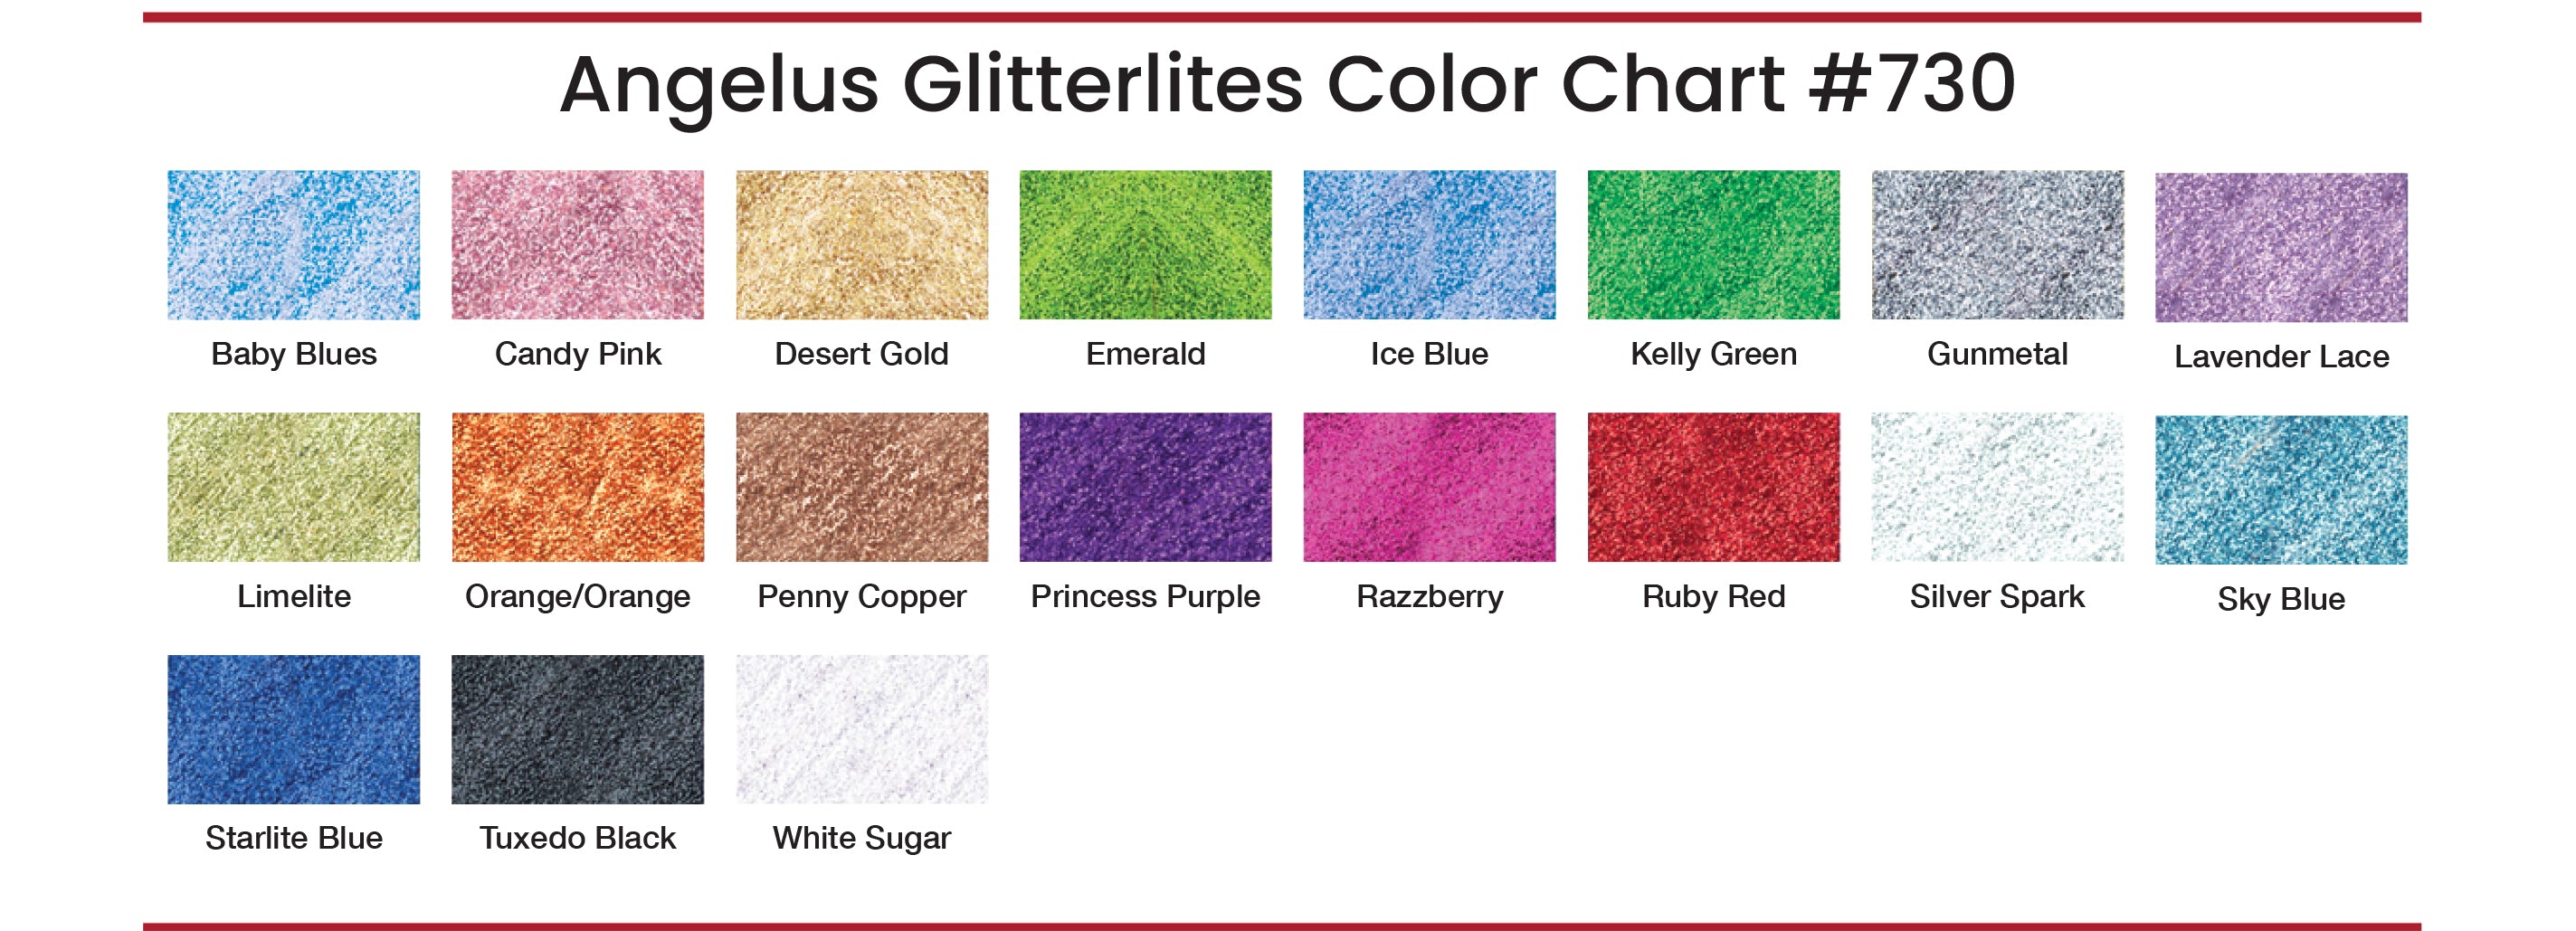 Multiple colors options available for the Angelus Glitterlites Leather paints. Select any color that match with your footwears.